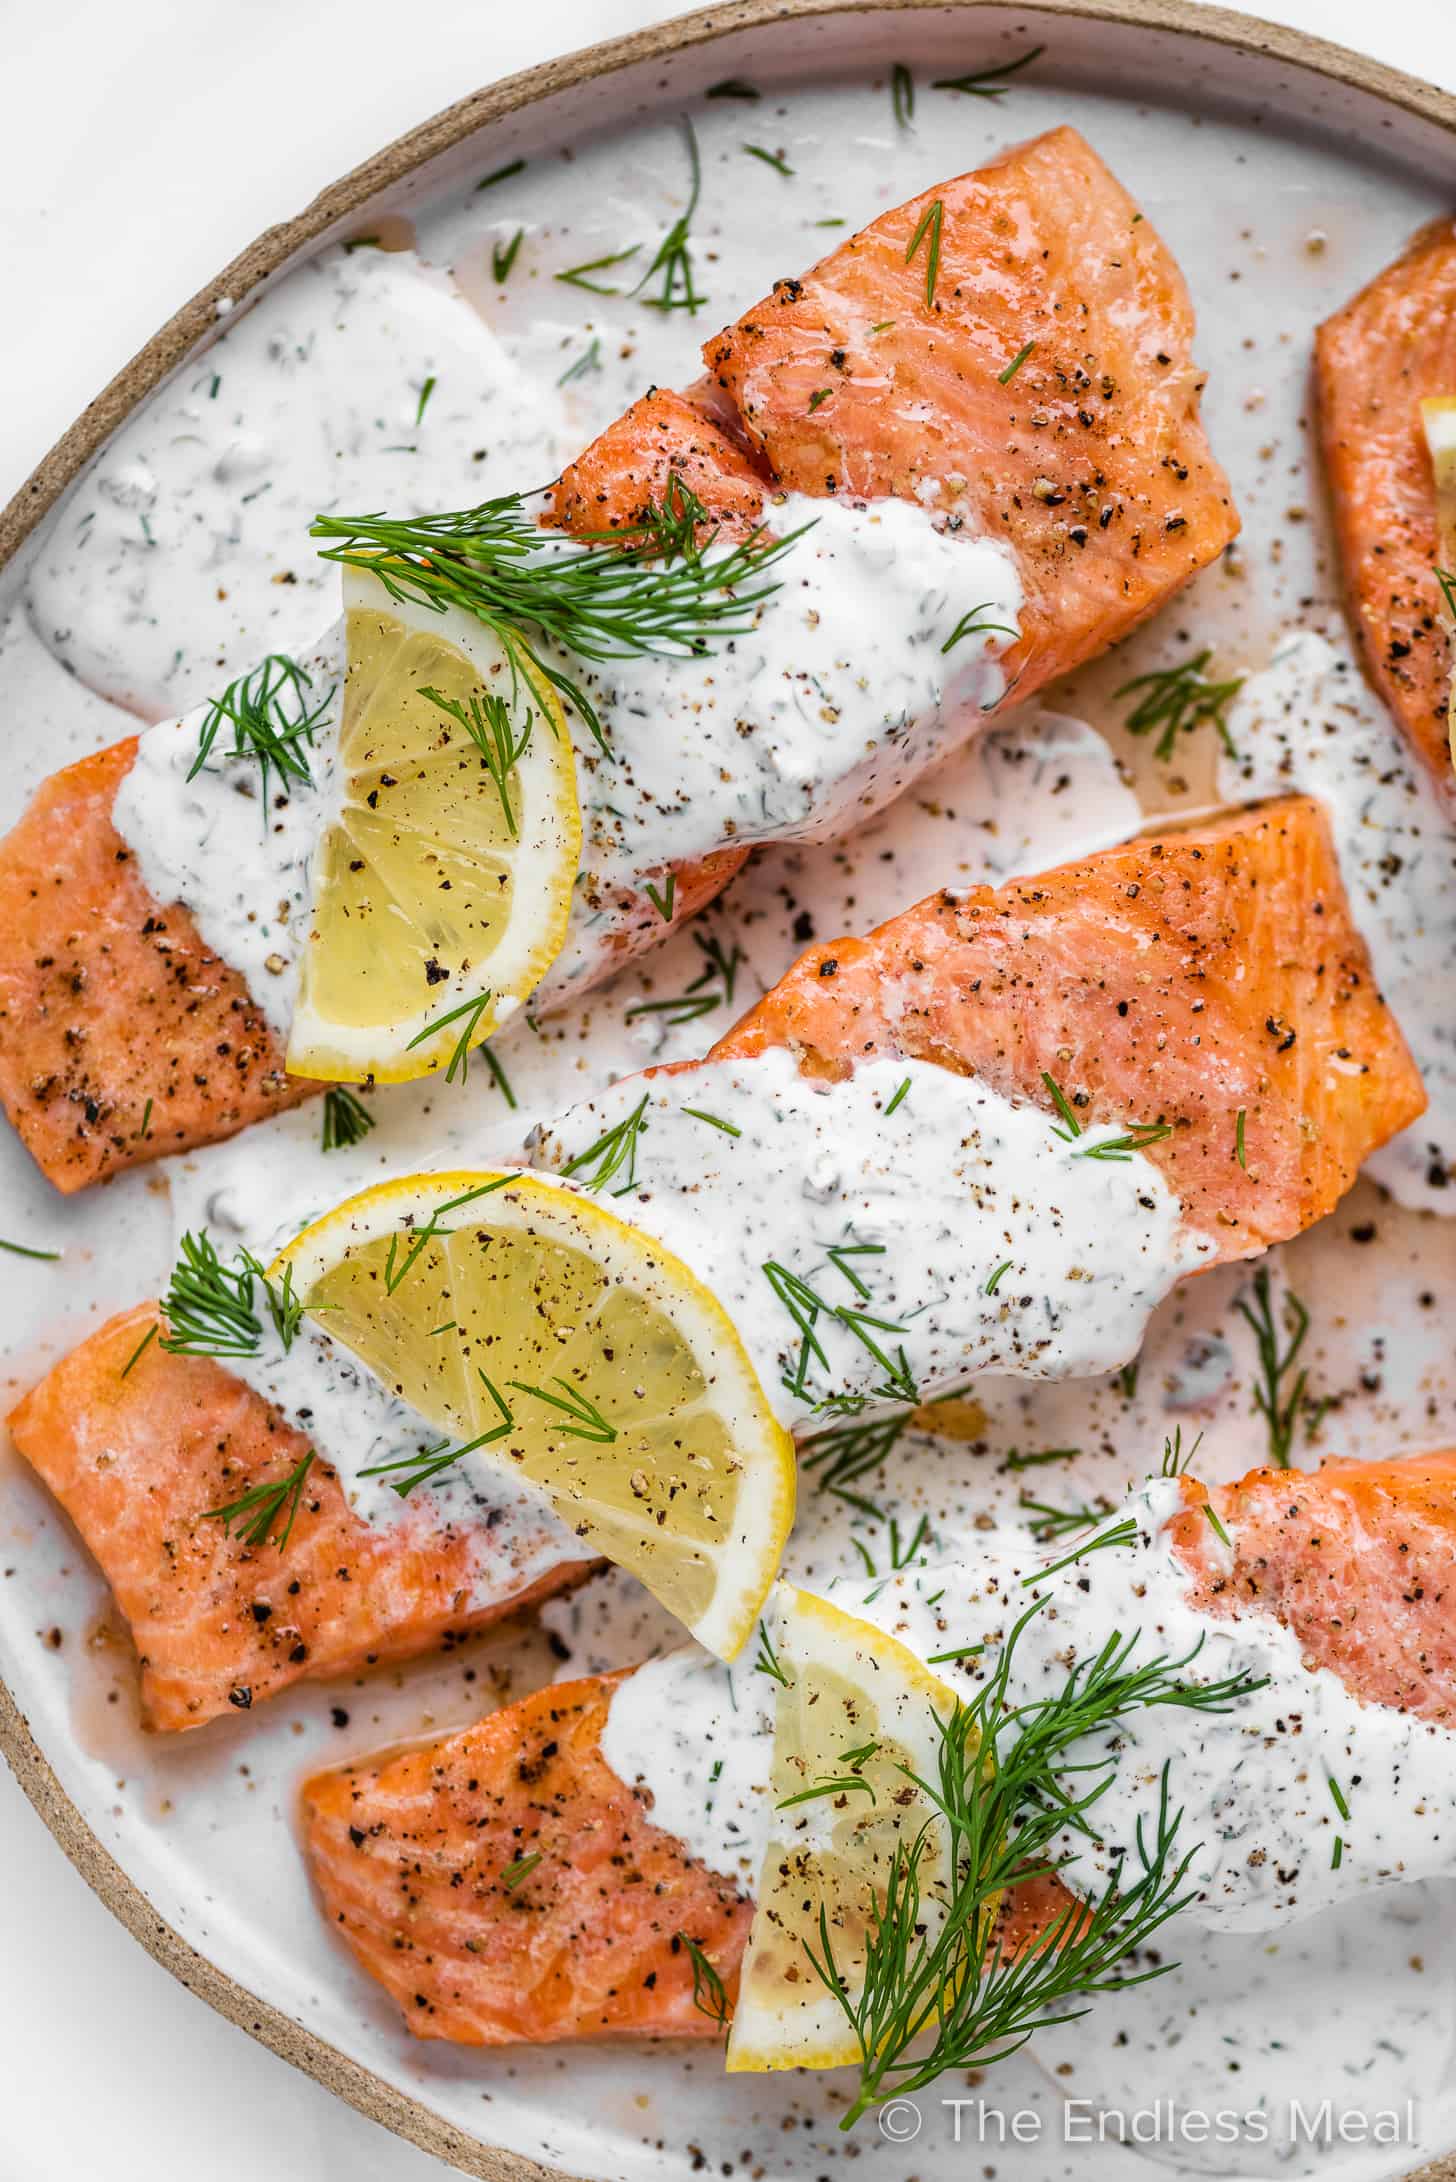 4 pieces of tender salmon with creamy lemon dill sauce